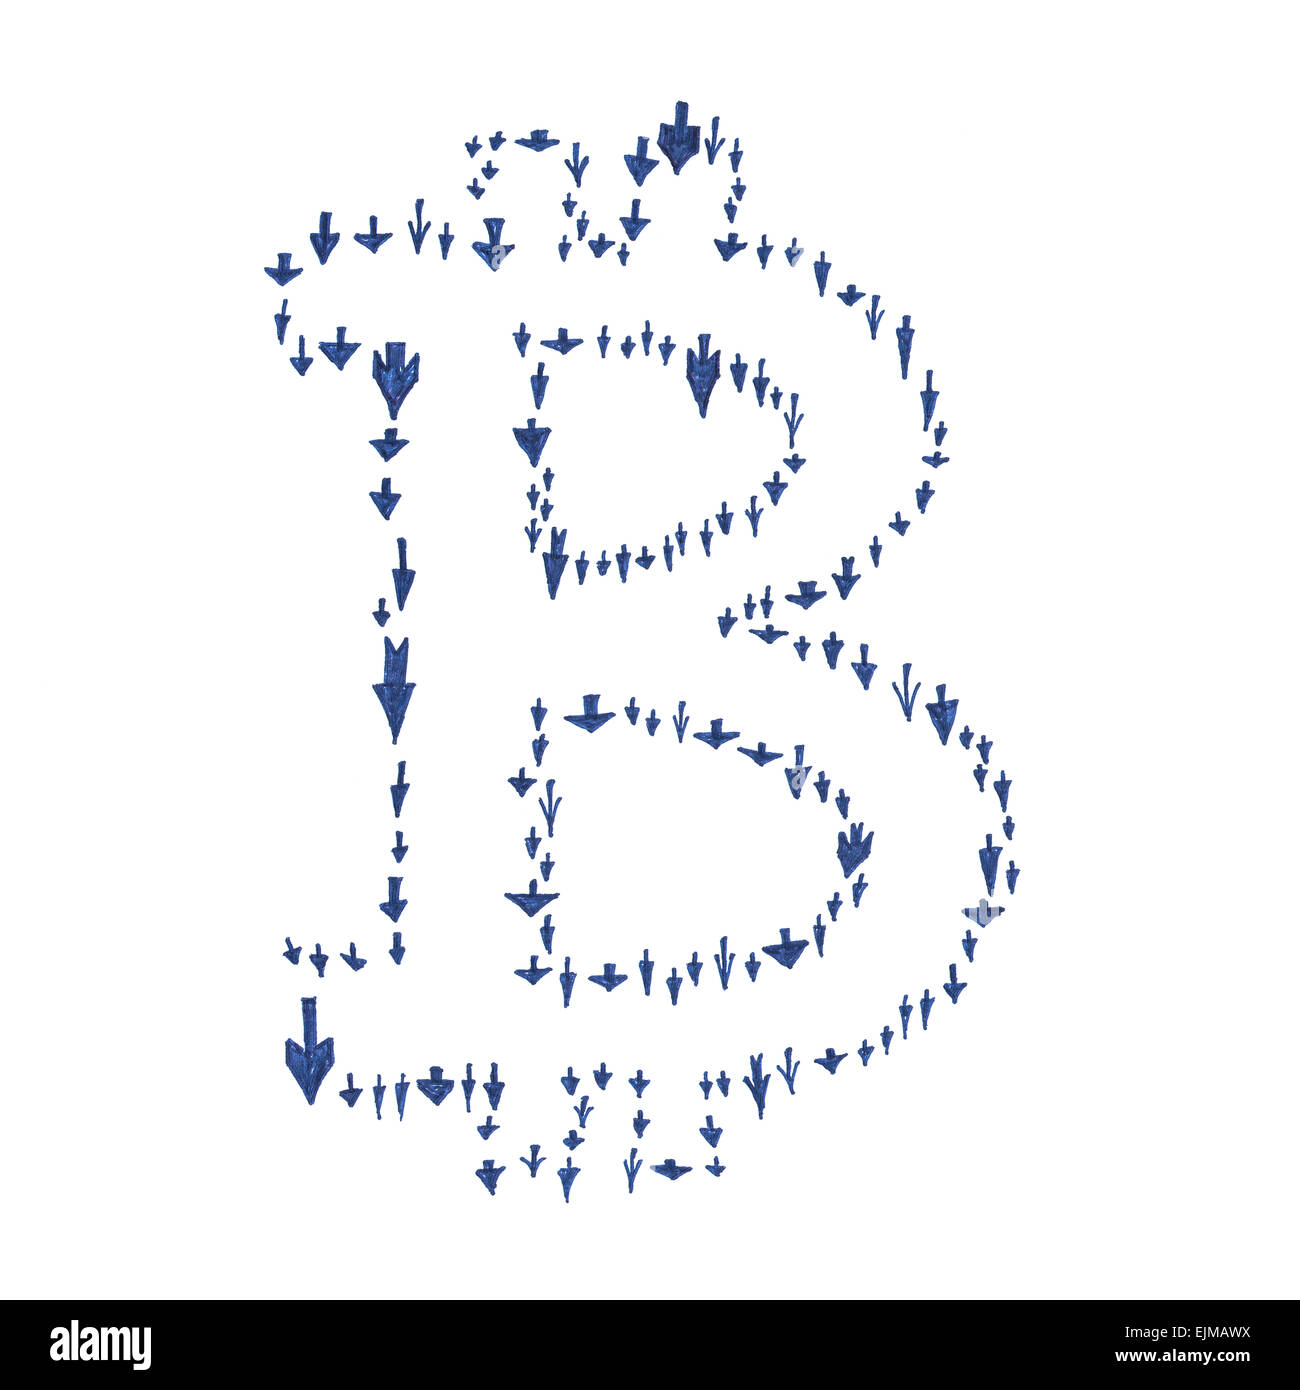 Bitcoin symbol arrow, handmade drawing of a digital crypto currency, small arrows indicating down in a shape of letter B Stock Photo